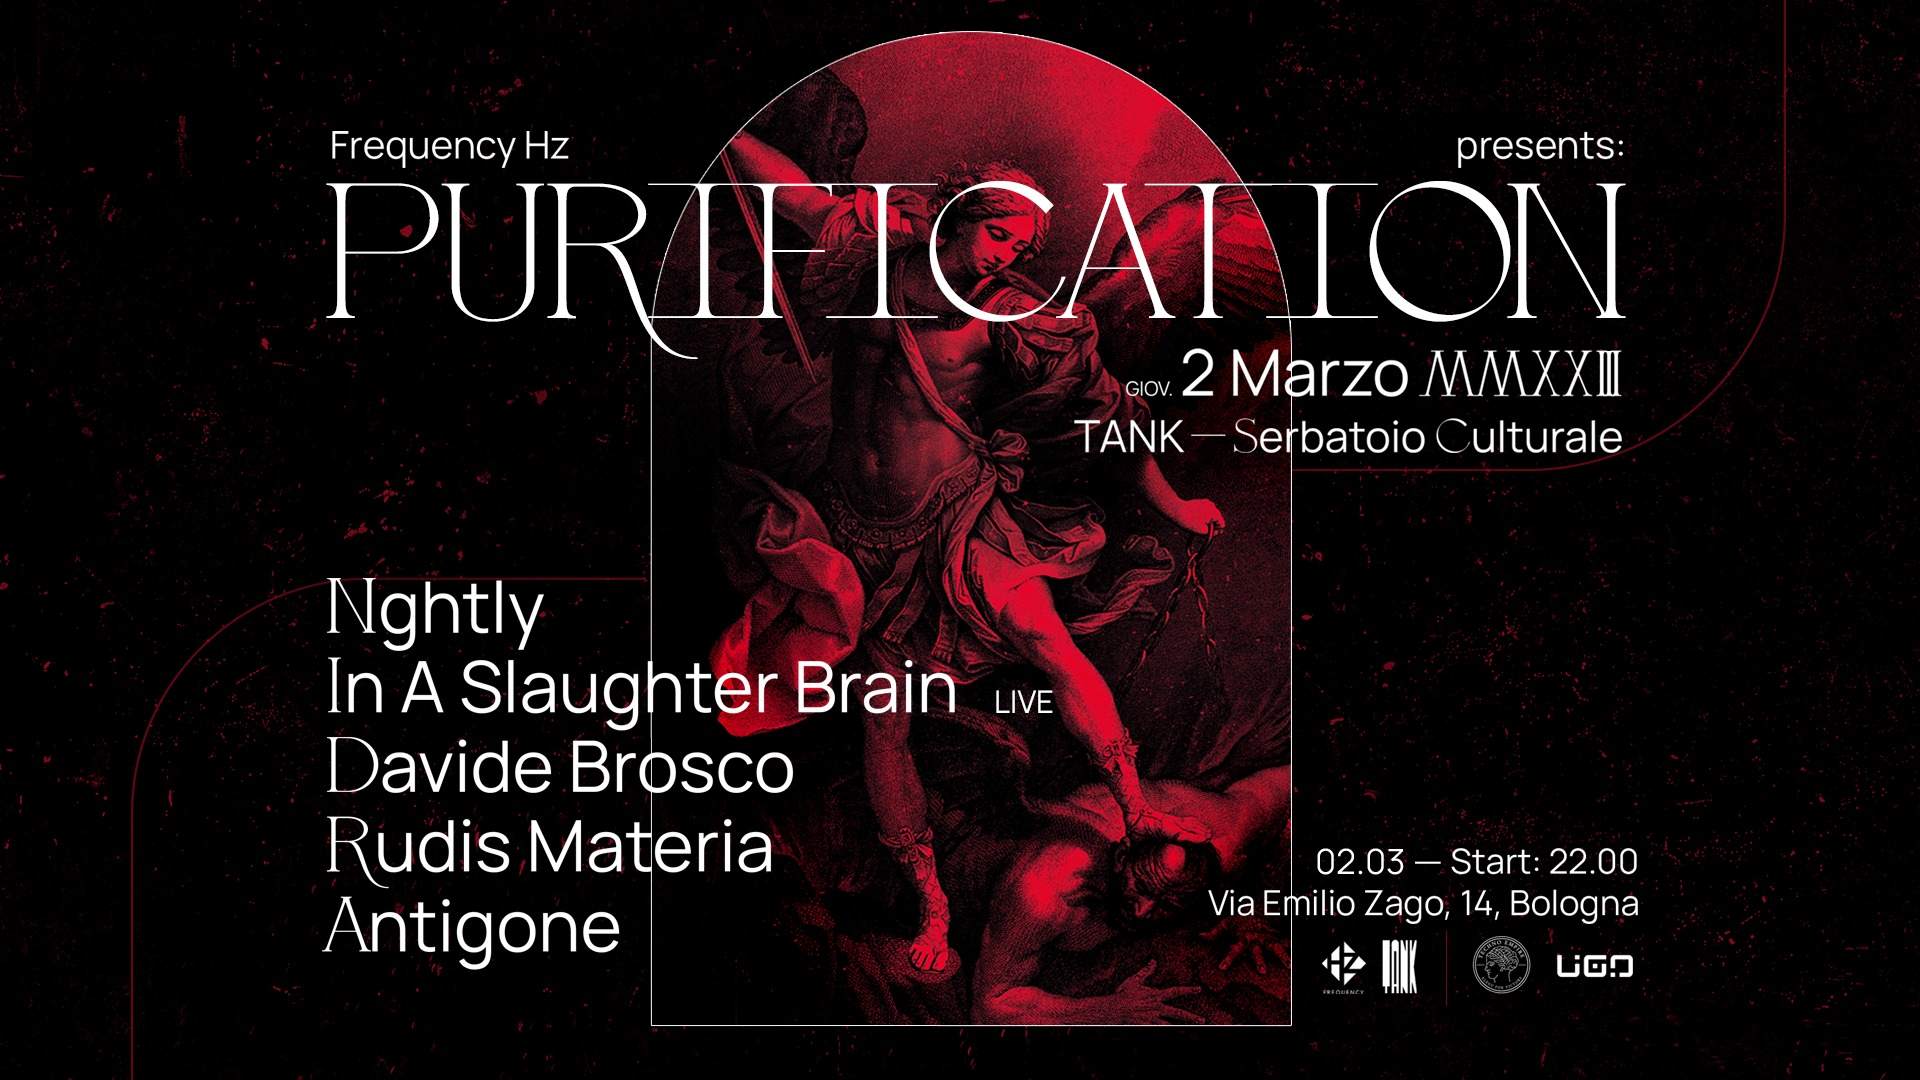 FREQUENCY HZ presents: 'PURIFICATION' - フライヤー表